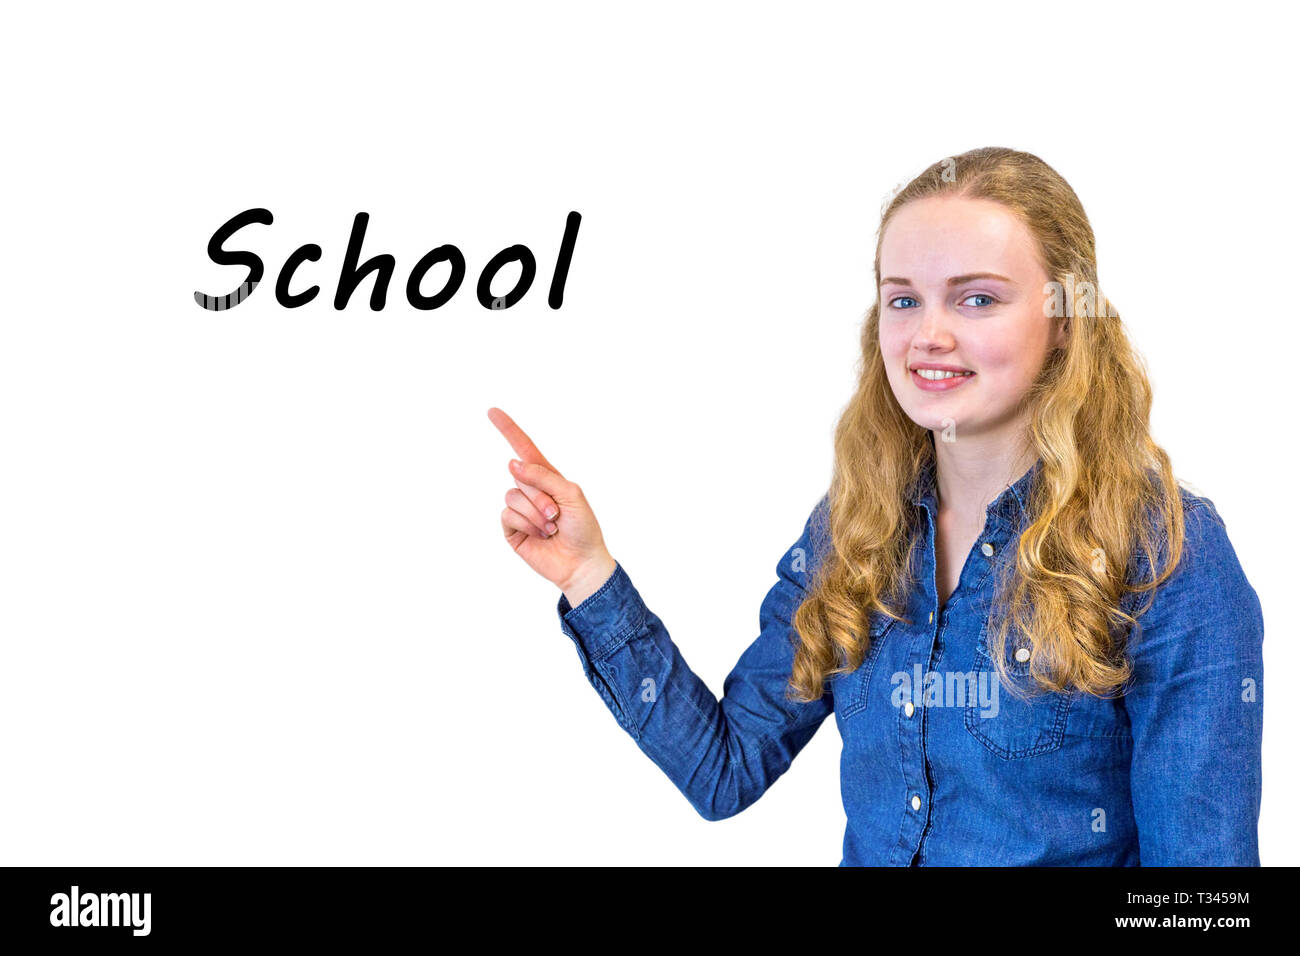 Caucasian female student points at word School on white board Stock Photo